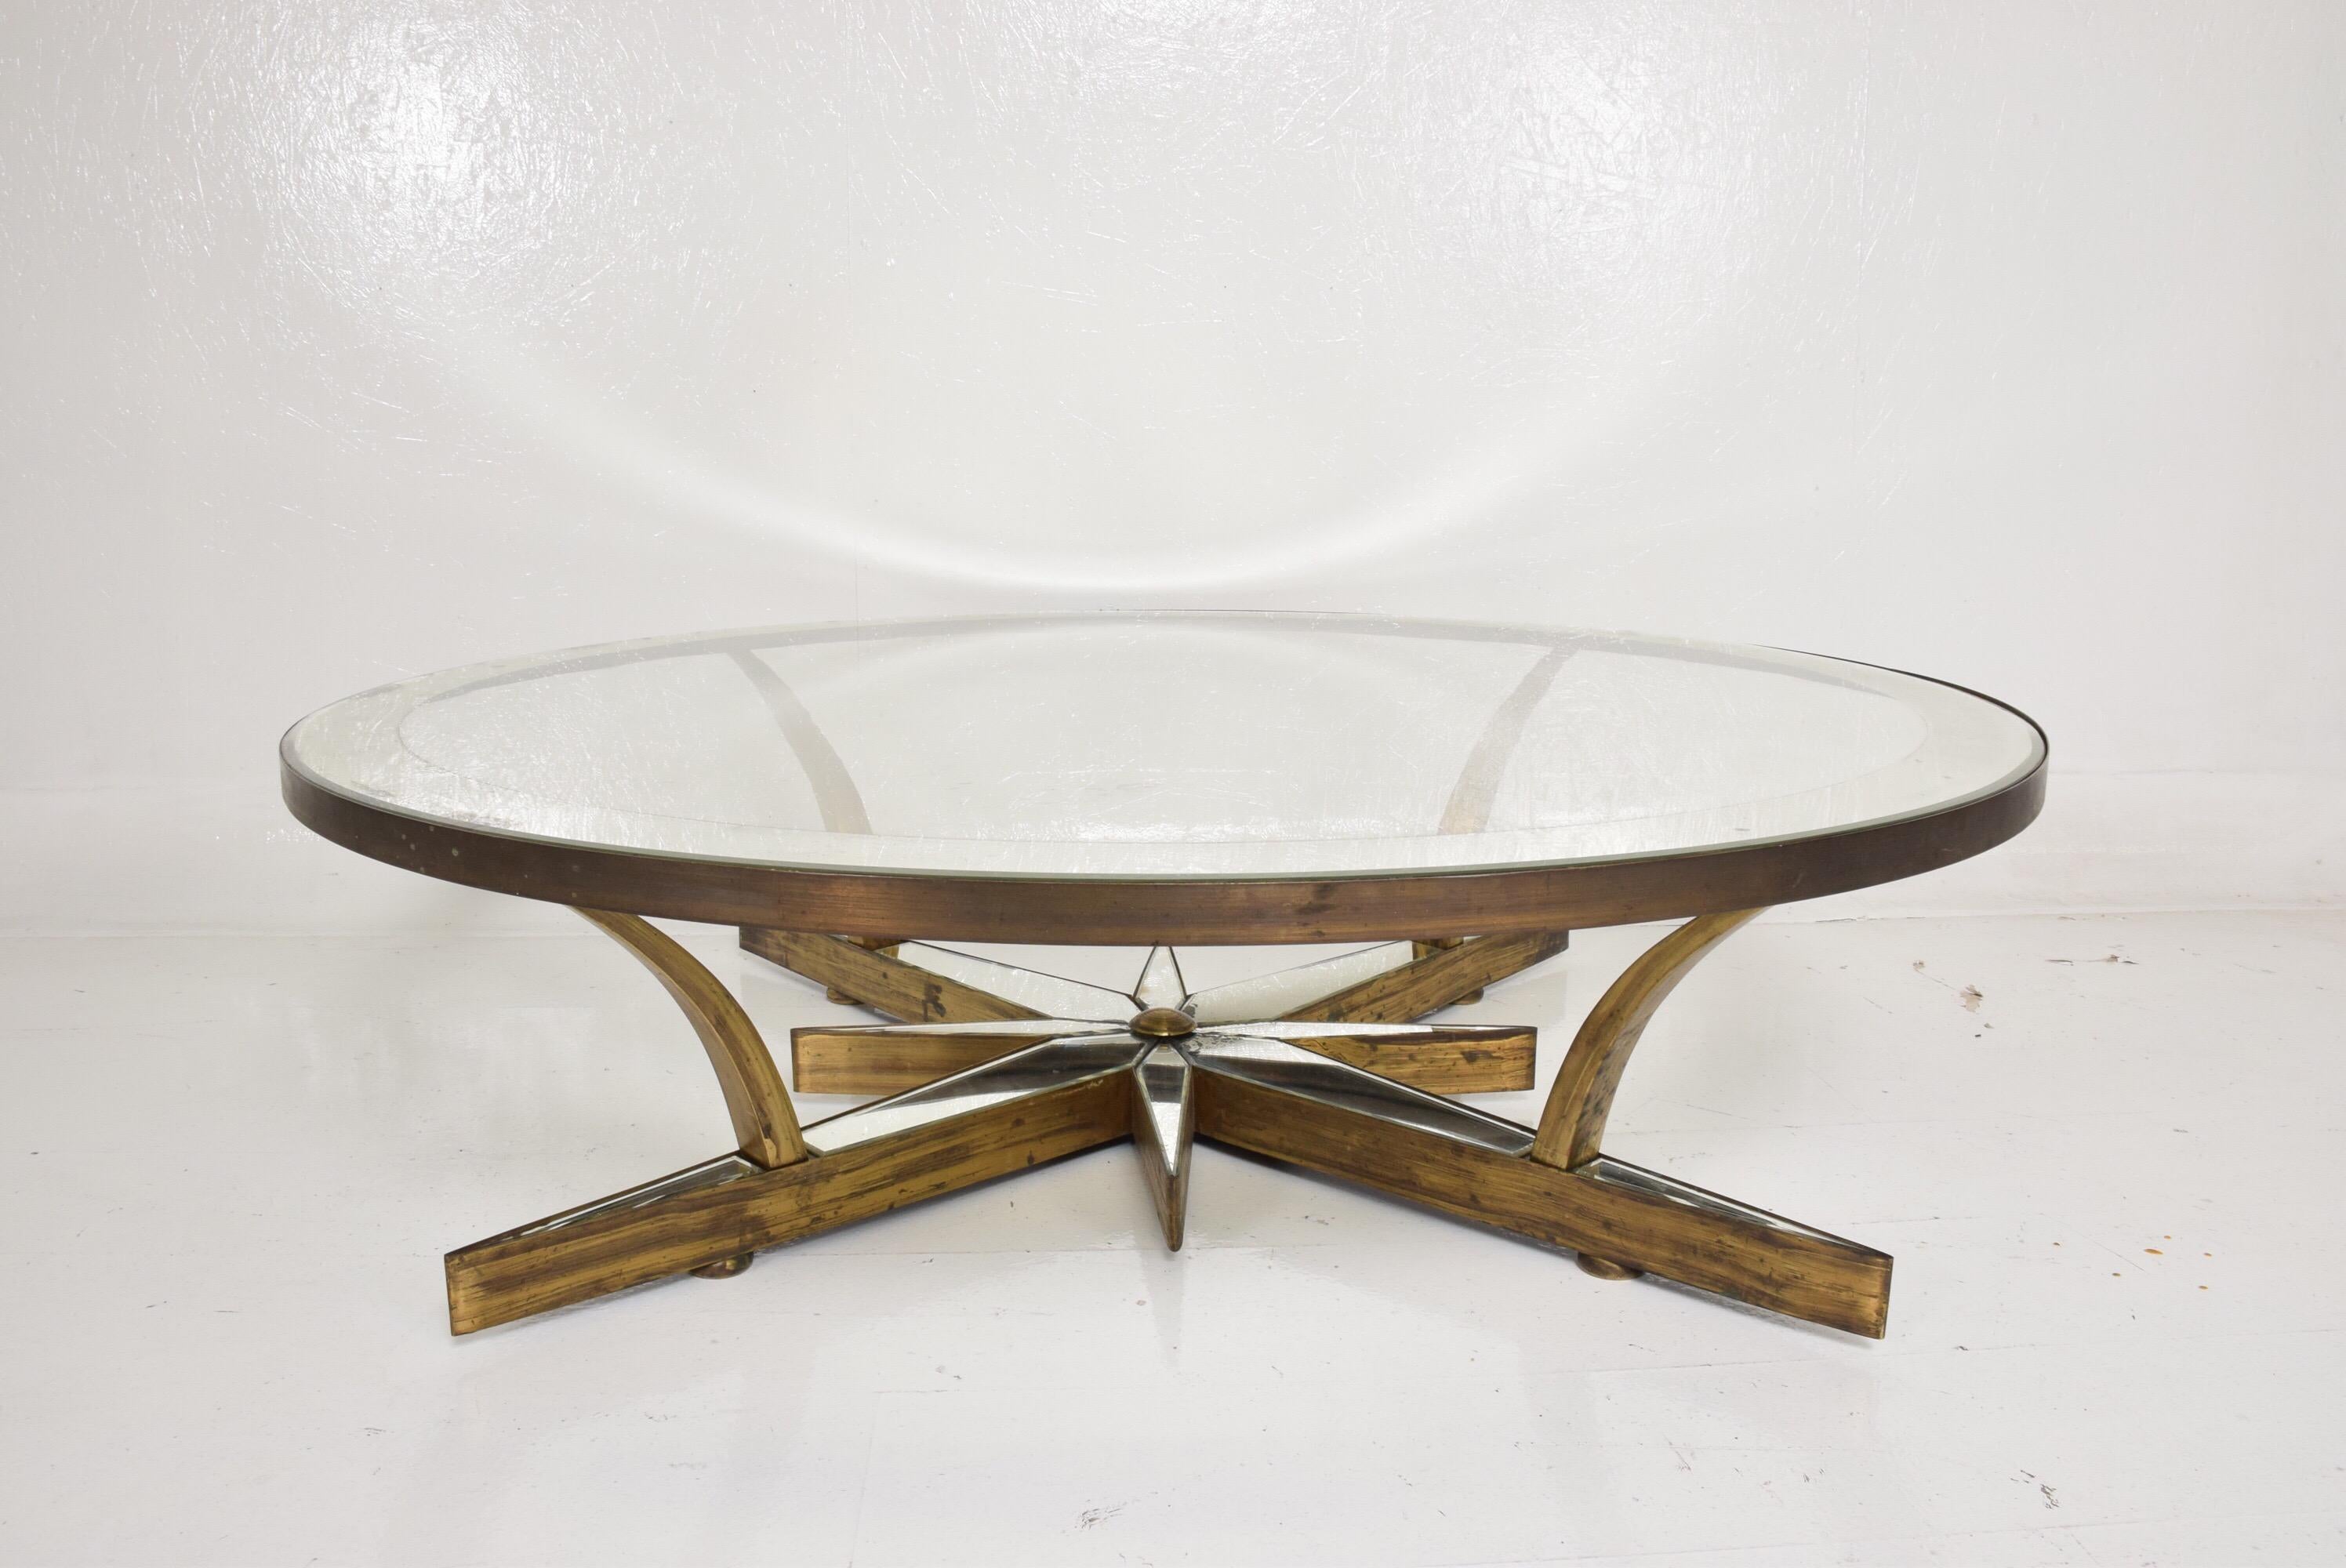 Patinated Mid-Century Modern Star Coffee, Cocktail Table Attributed to Arturo Pani